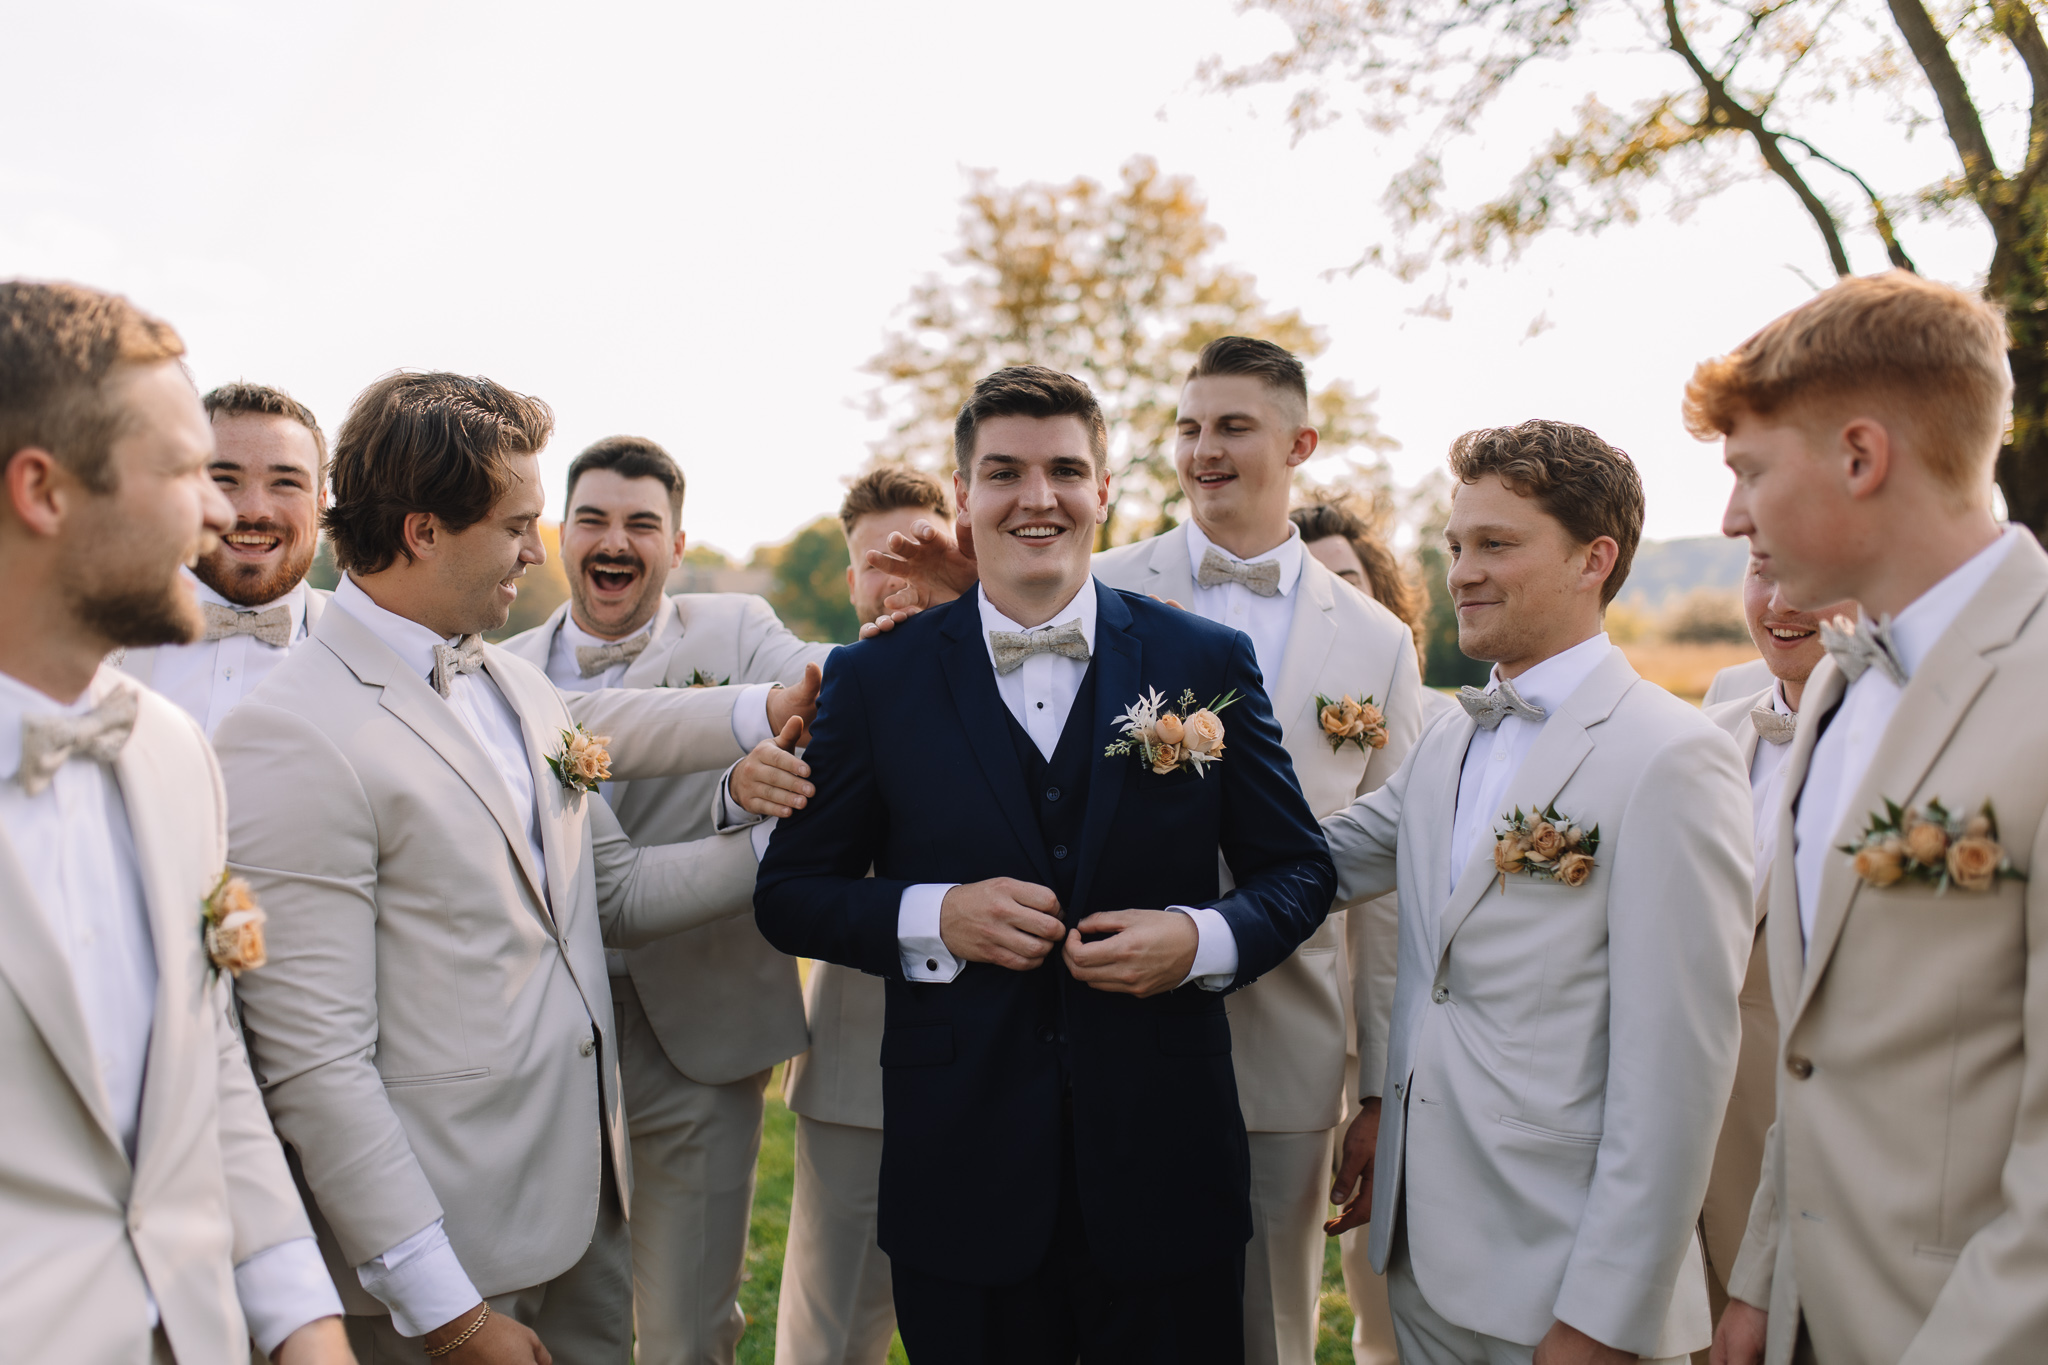 Groom in a navy blue suit surrounded by his groomsmen in oatmeal colored suits with peach boutonniere pocket squares in Stillwater, Minnesota